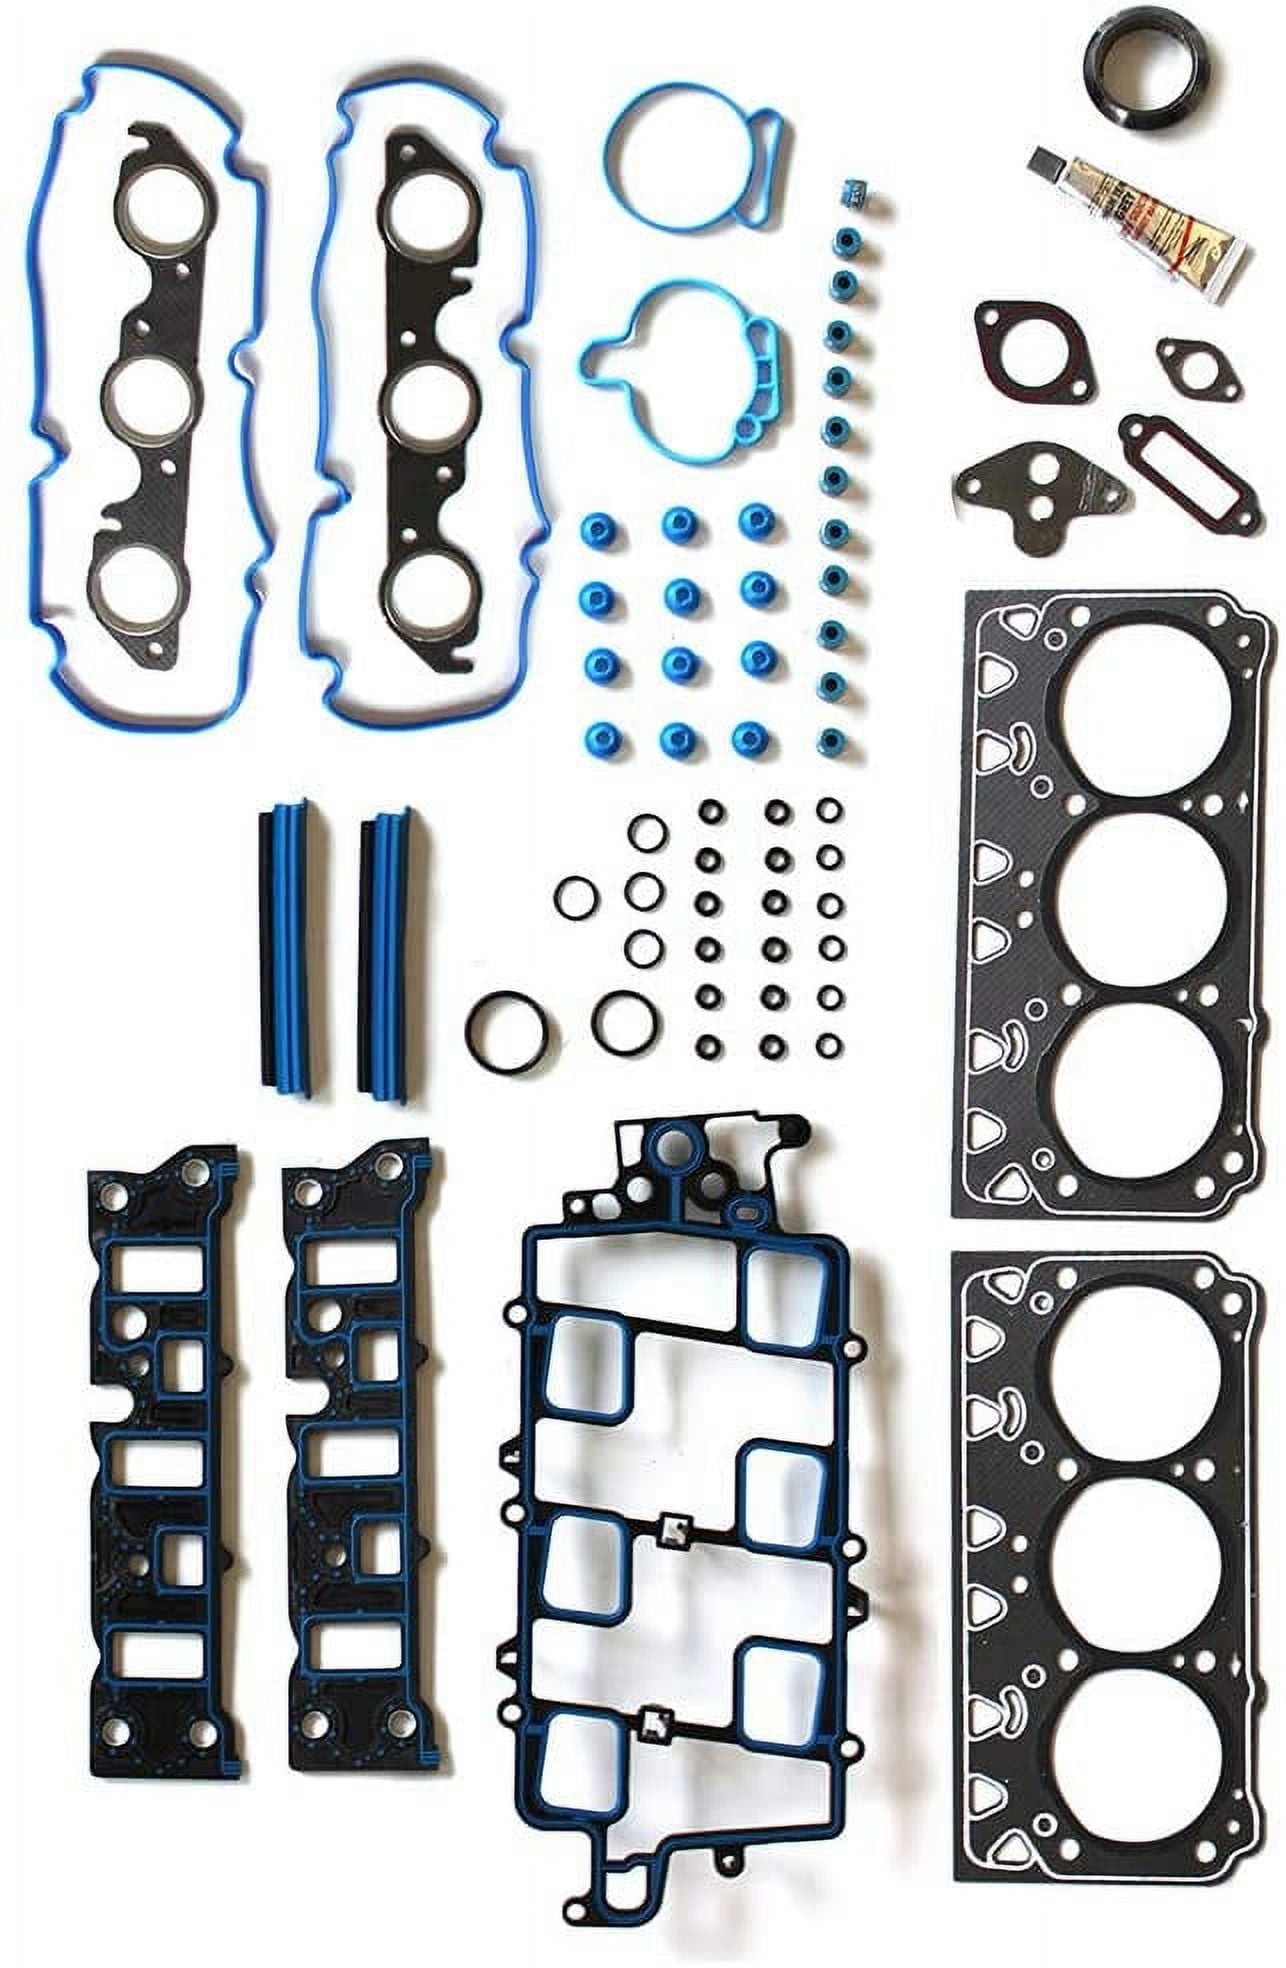 ECCPP Head Gasket for 97-05 for Buick Lacrosse Lesabre Park Avenue Regal  Riviera for Chevrolet Impala Lumina Monte for Oldsmobile 88 Intrigue LSS  Regency for Pontiac 3.8L V6 Head Gaskets Set